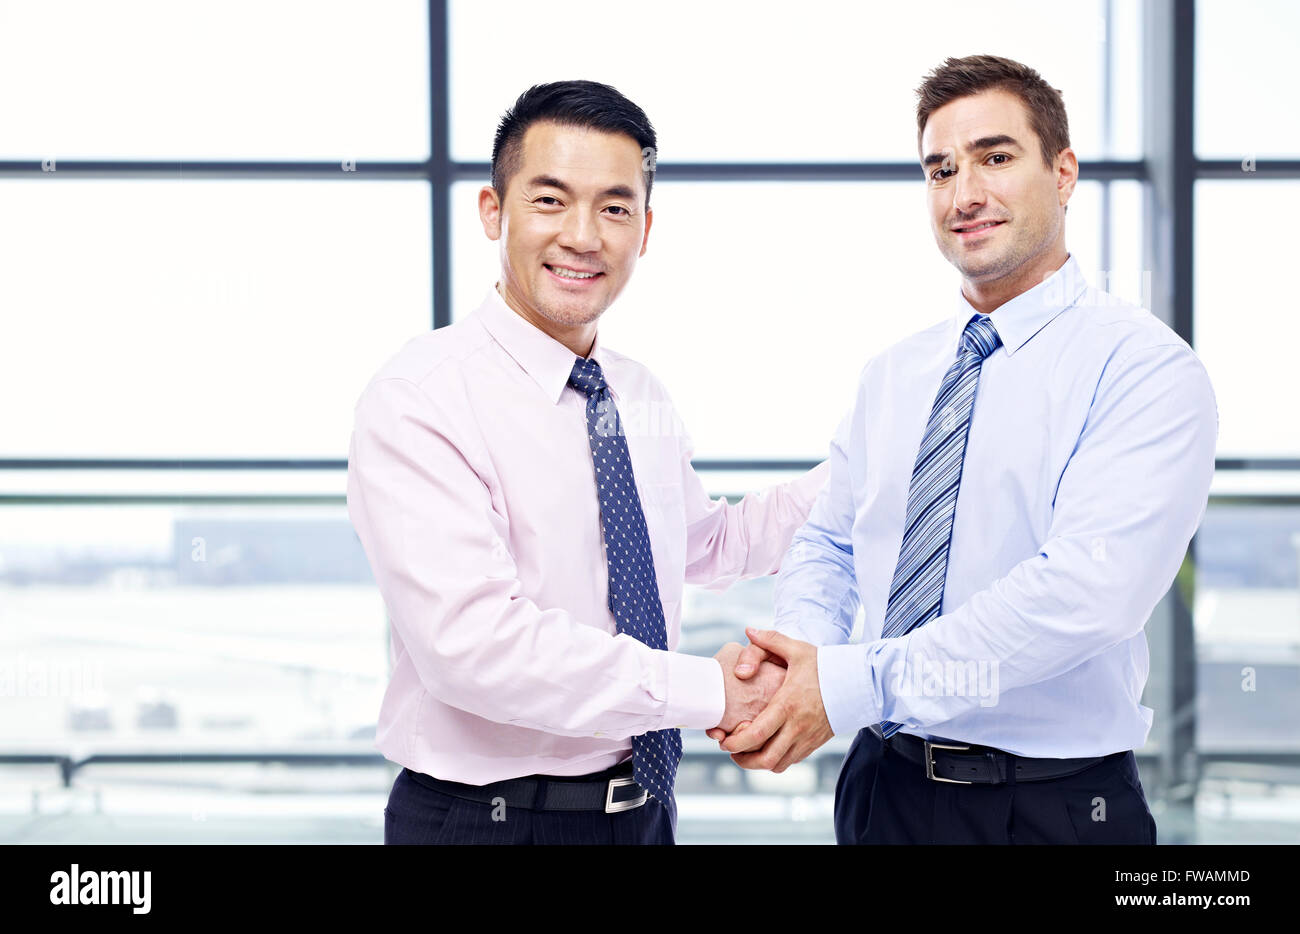 Asian and Caucasian businessmen shaking hands at airport. Banque D'Images